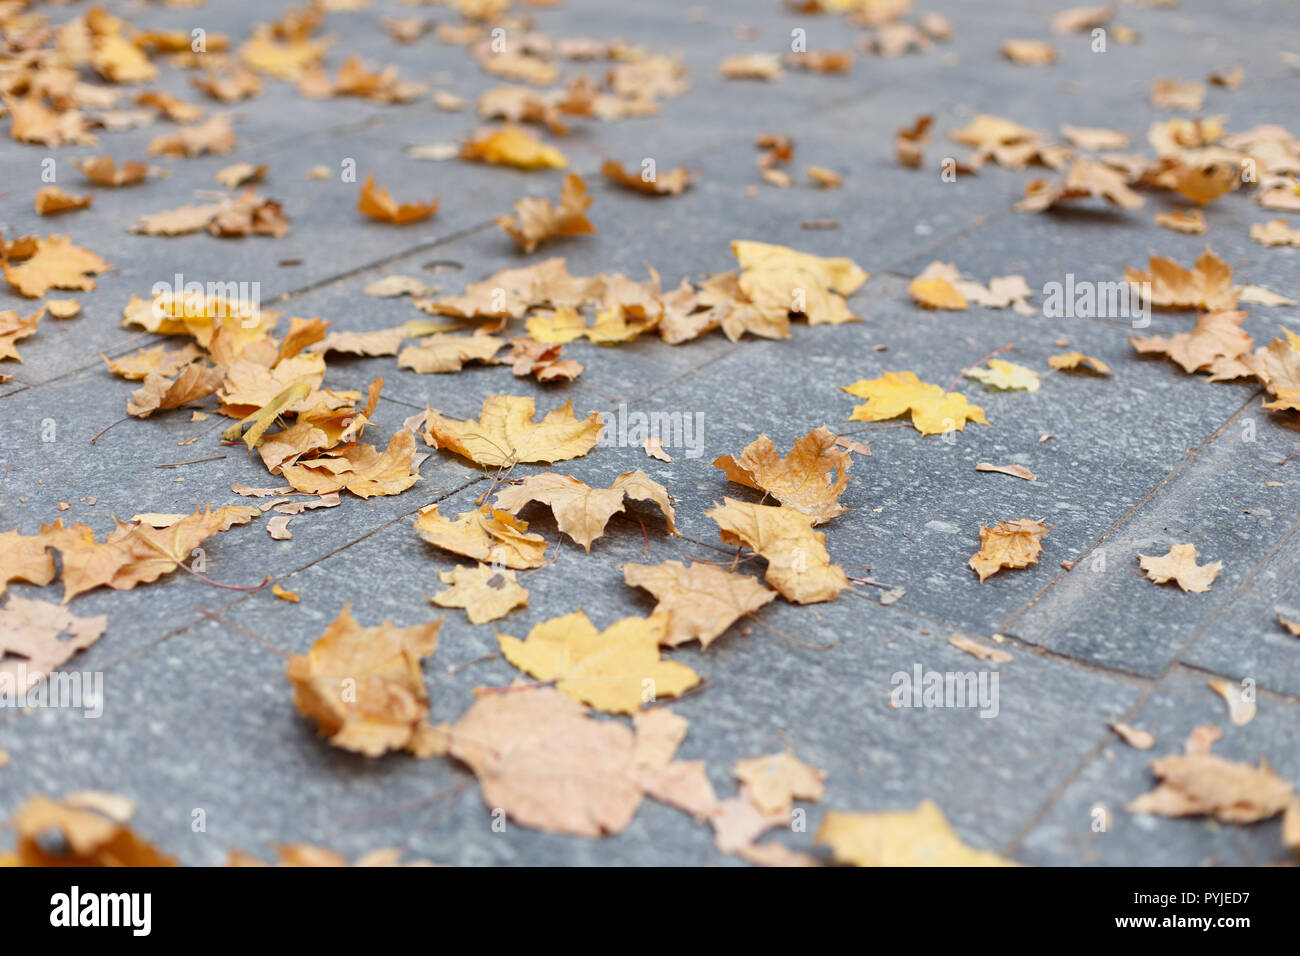 Fallen leaves on the sidewalk, autumn in the city Stock Photo